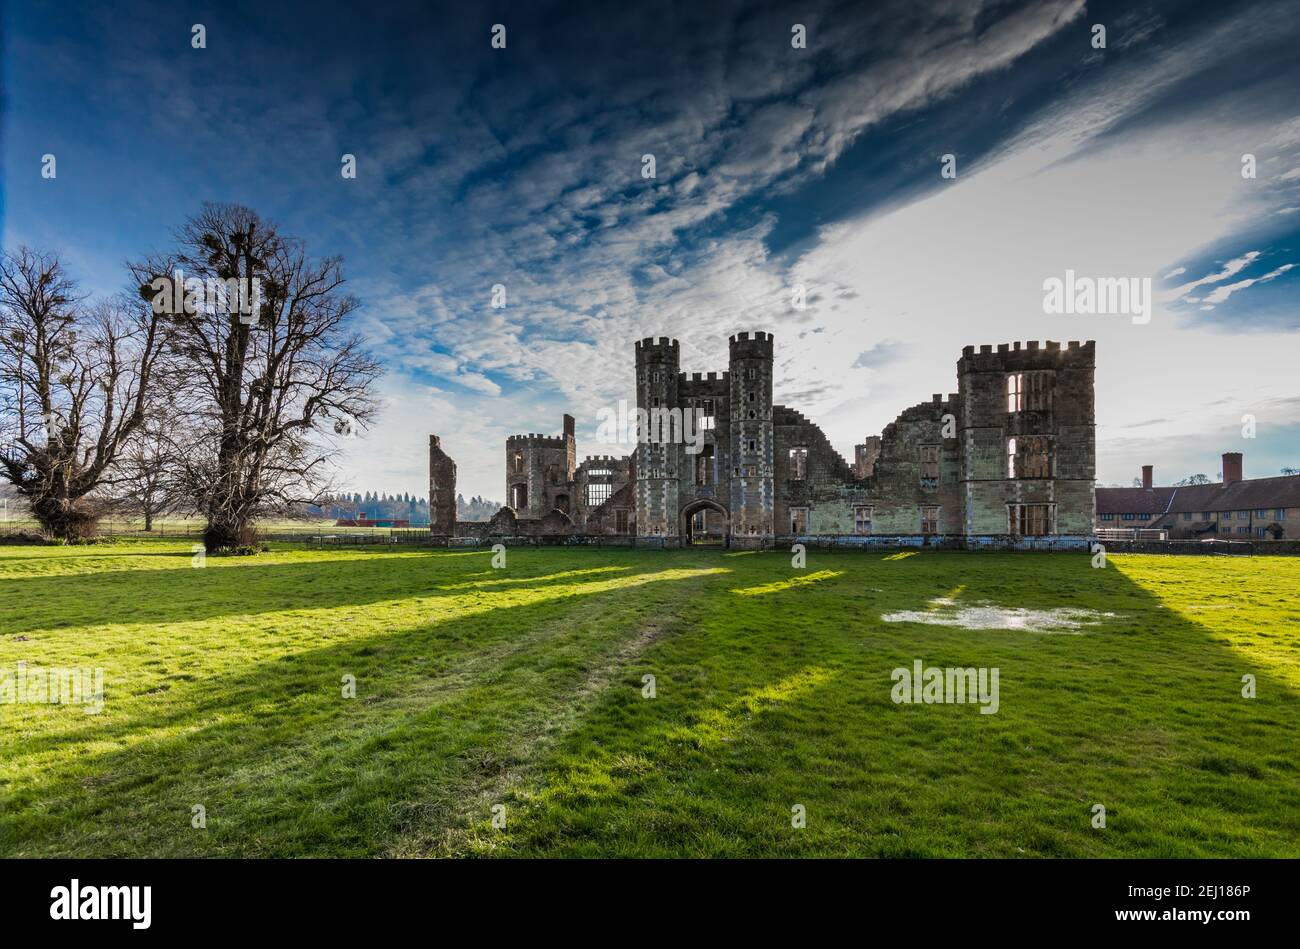 The ruins of Cowdray House, Midhurst, West Sussex, UK Stock Photo